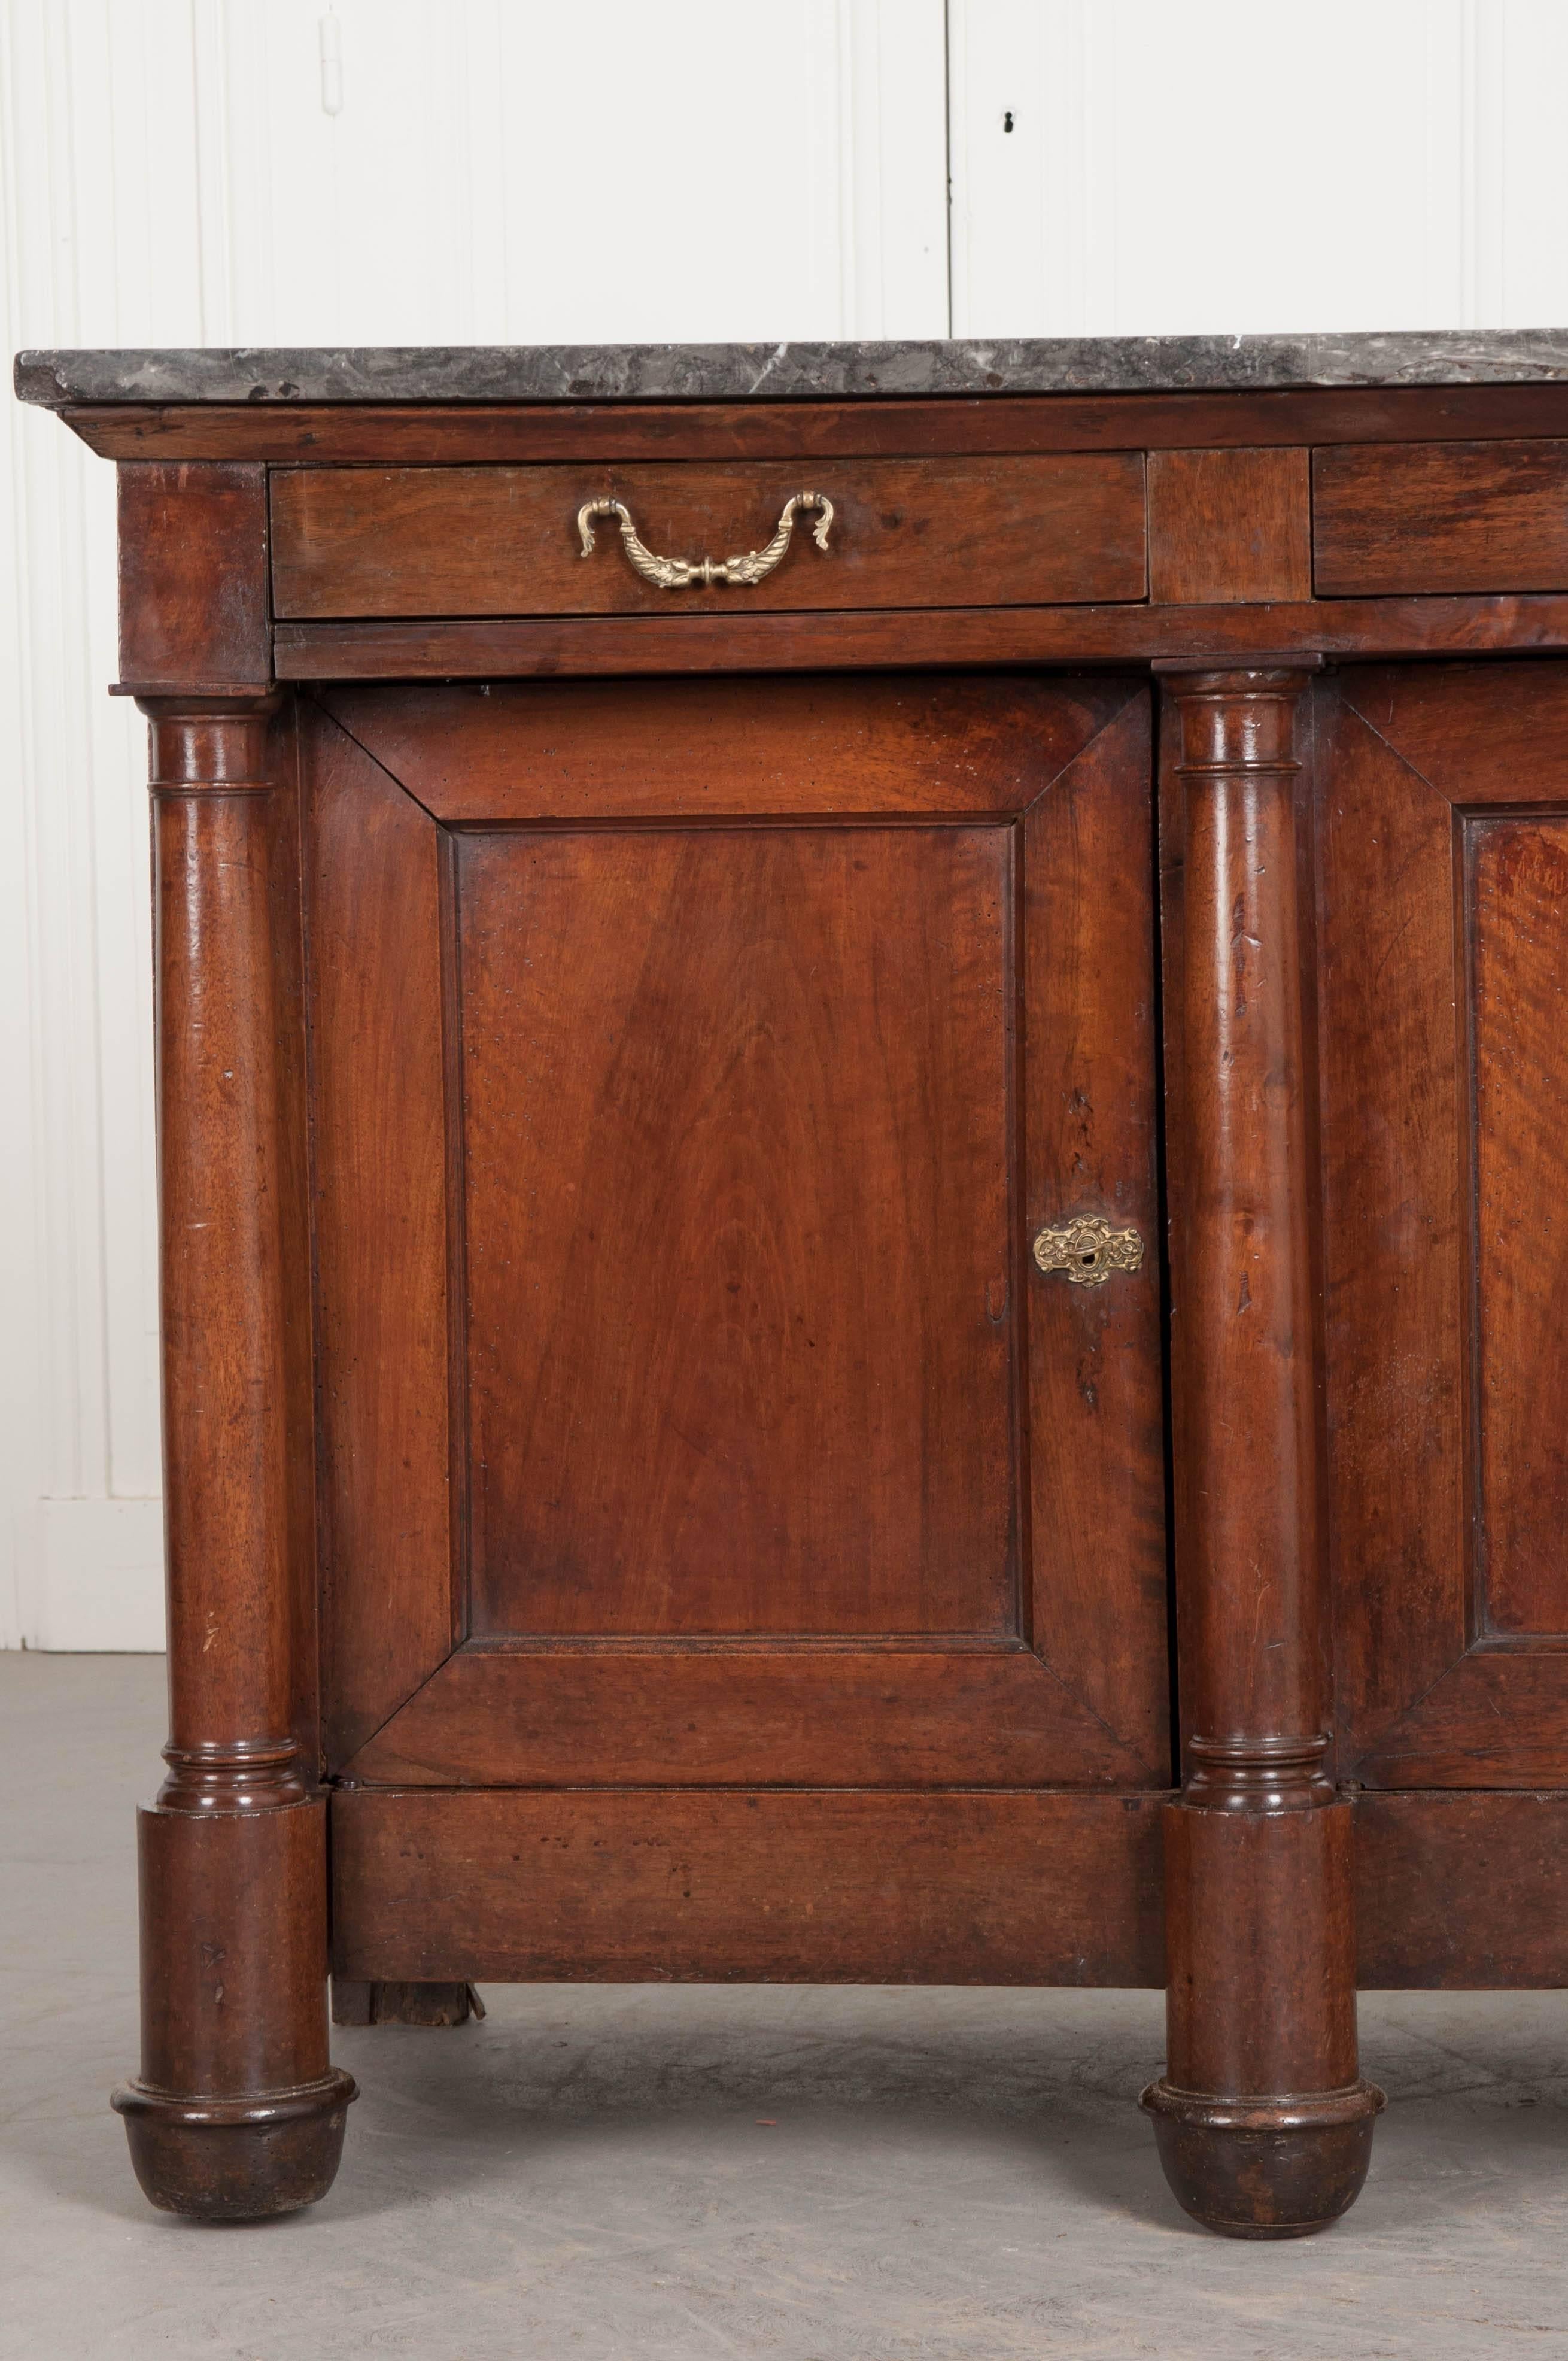 This striking mahogany enfilade, done in the Empire style, was made in France, circa 1860. The marble top is gray, with some flashes of pink, and has been repaired in its lifetime. It rests nicely atop an extraordinary mahogany enfilade, featuring